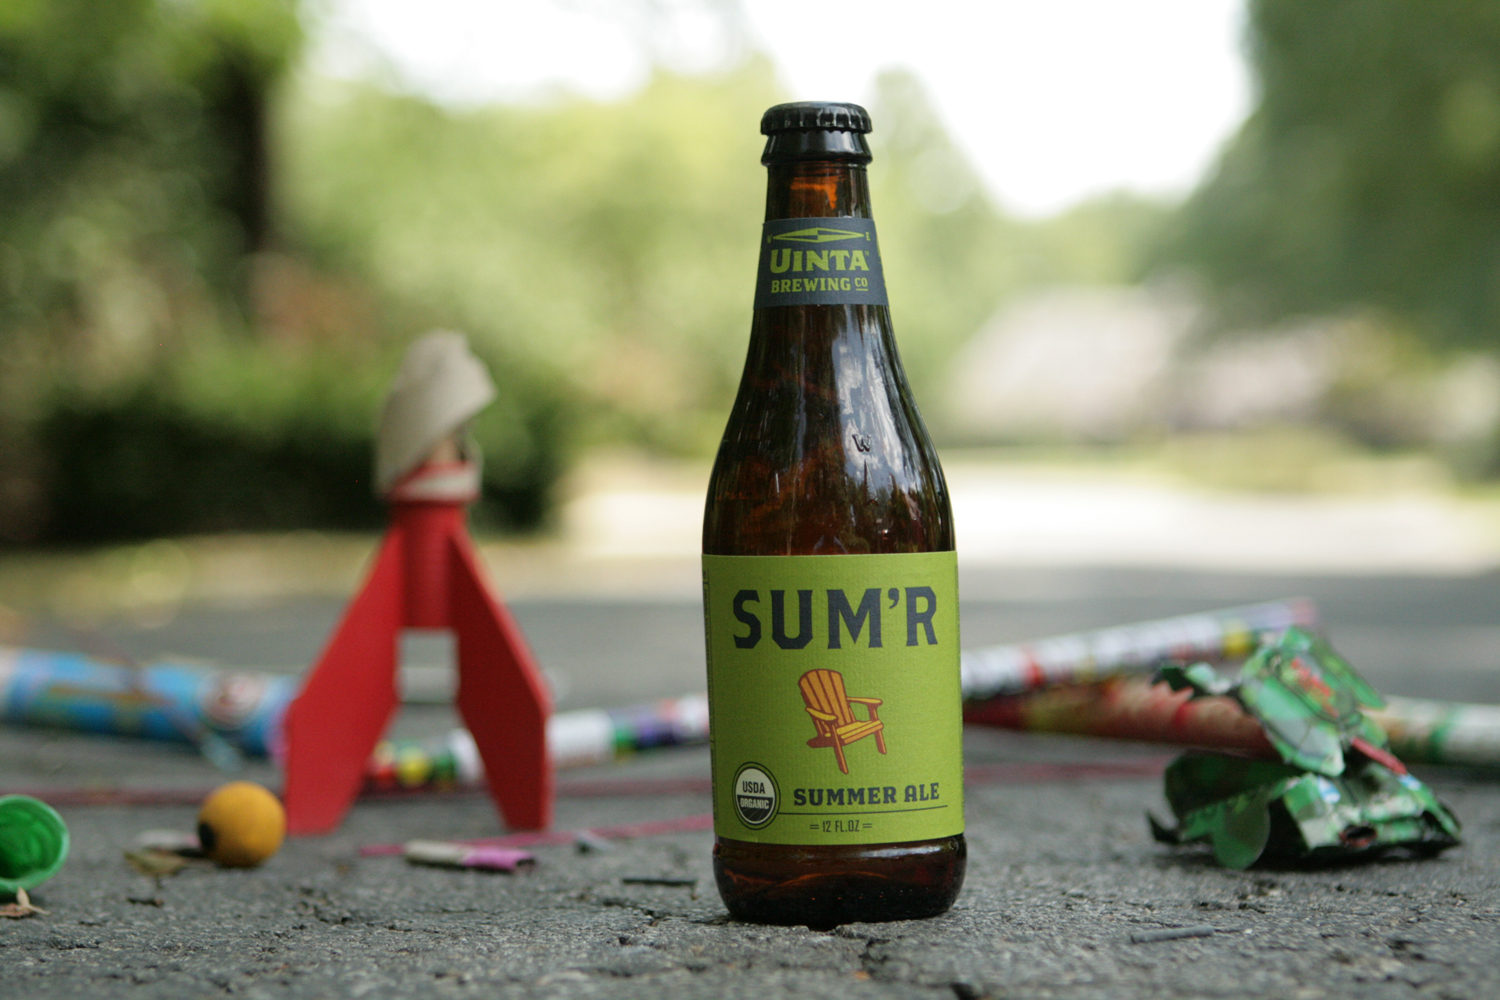 Sum'r summer organic beer is a delicious way to spend the season.